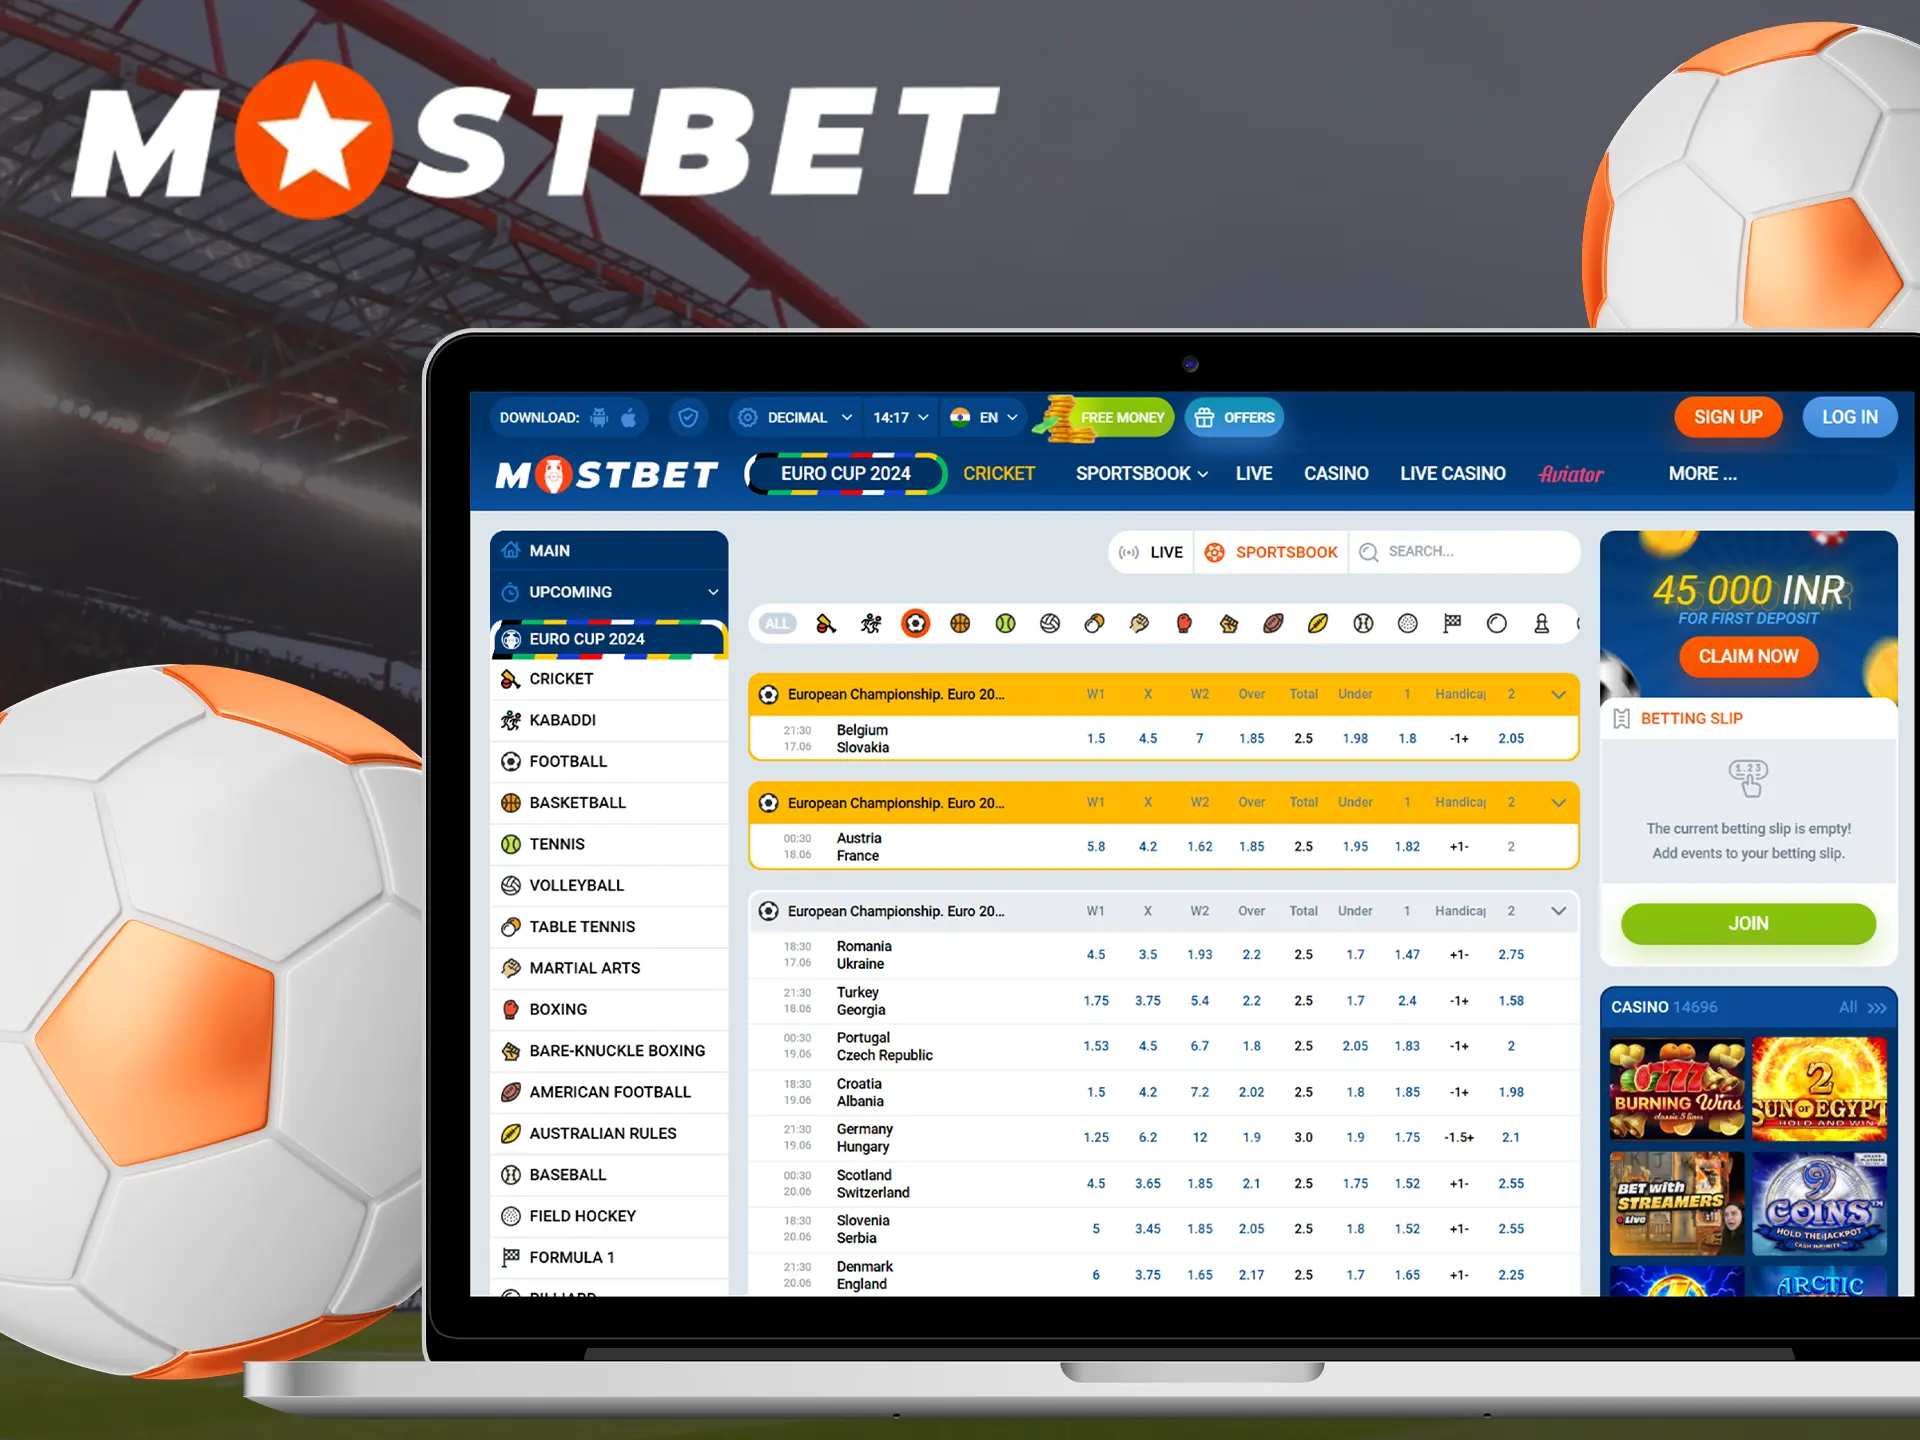 Go to the Mostbet football betting section.